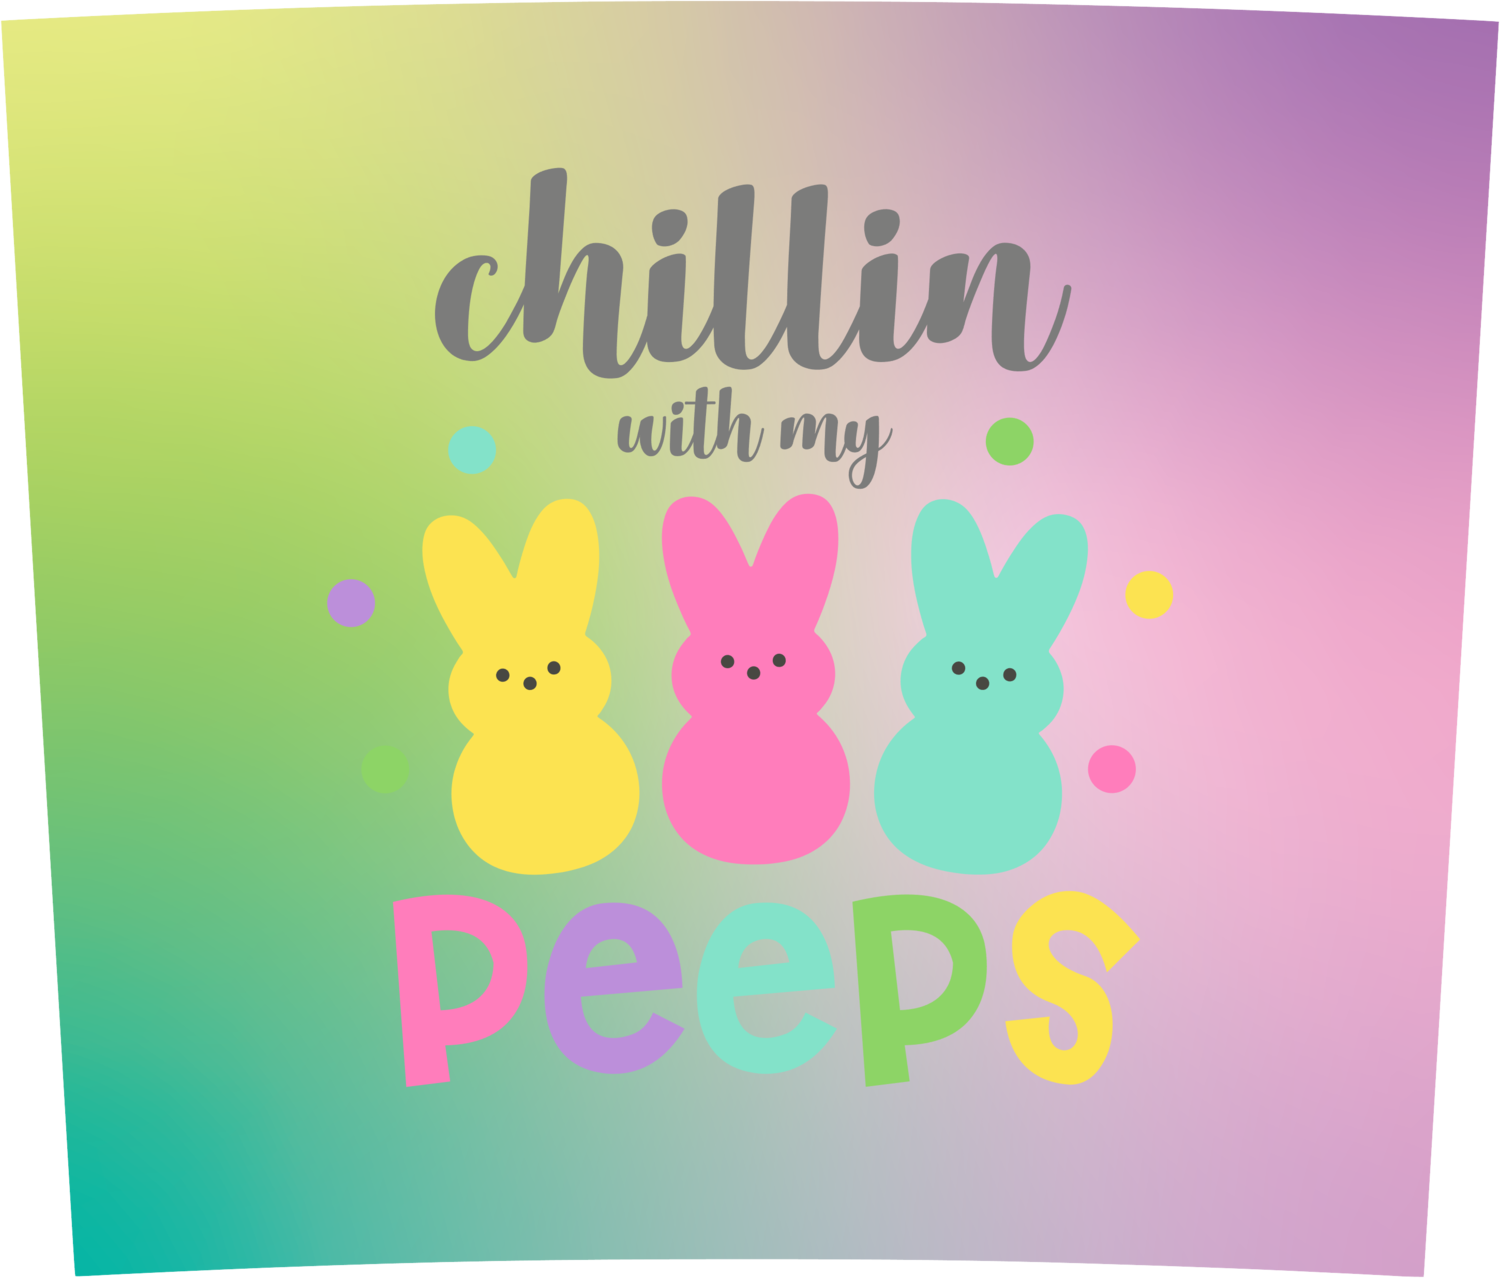 chillin with my peeps image